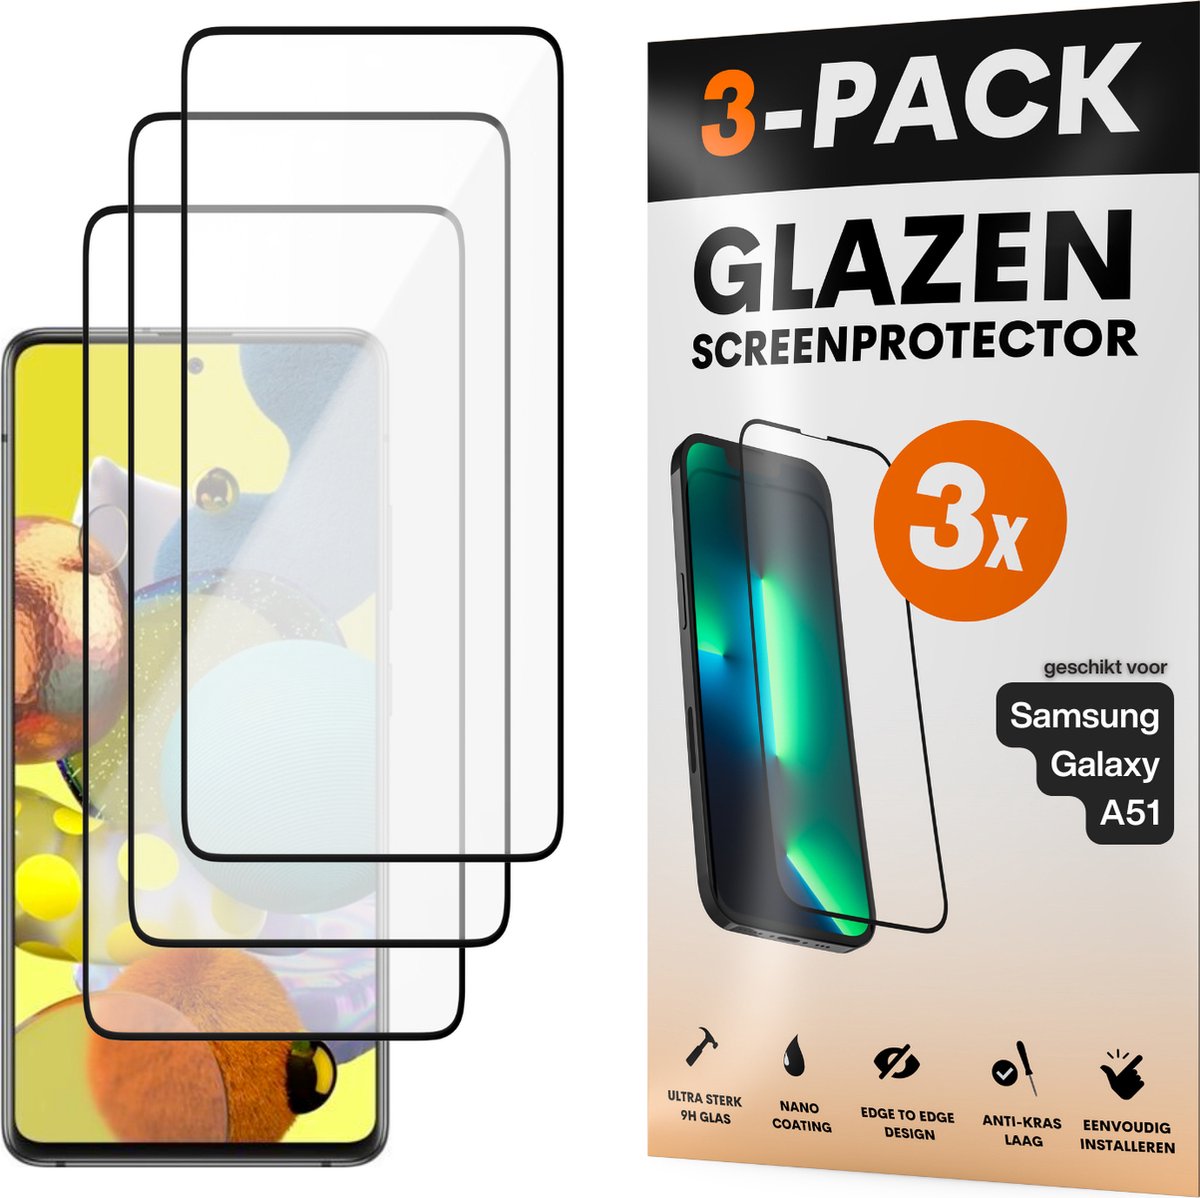 Screenprotector - Geschikt voor Samsung Galaxy A51 - Gehard Glas - Full Cover Tempered Glass - Case Friendly - 3 Pack